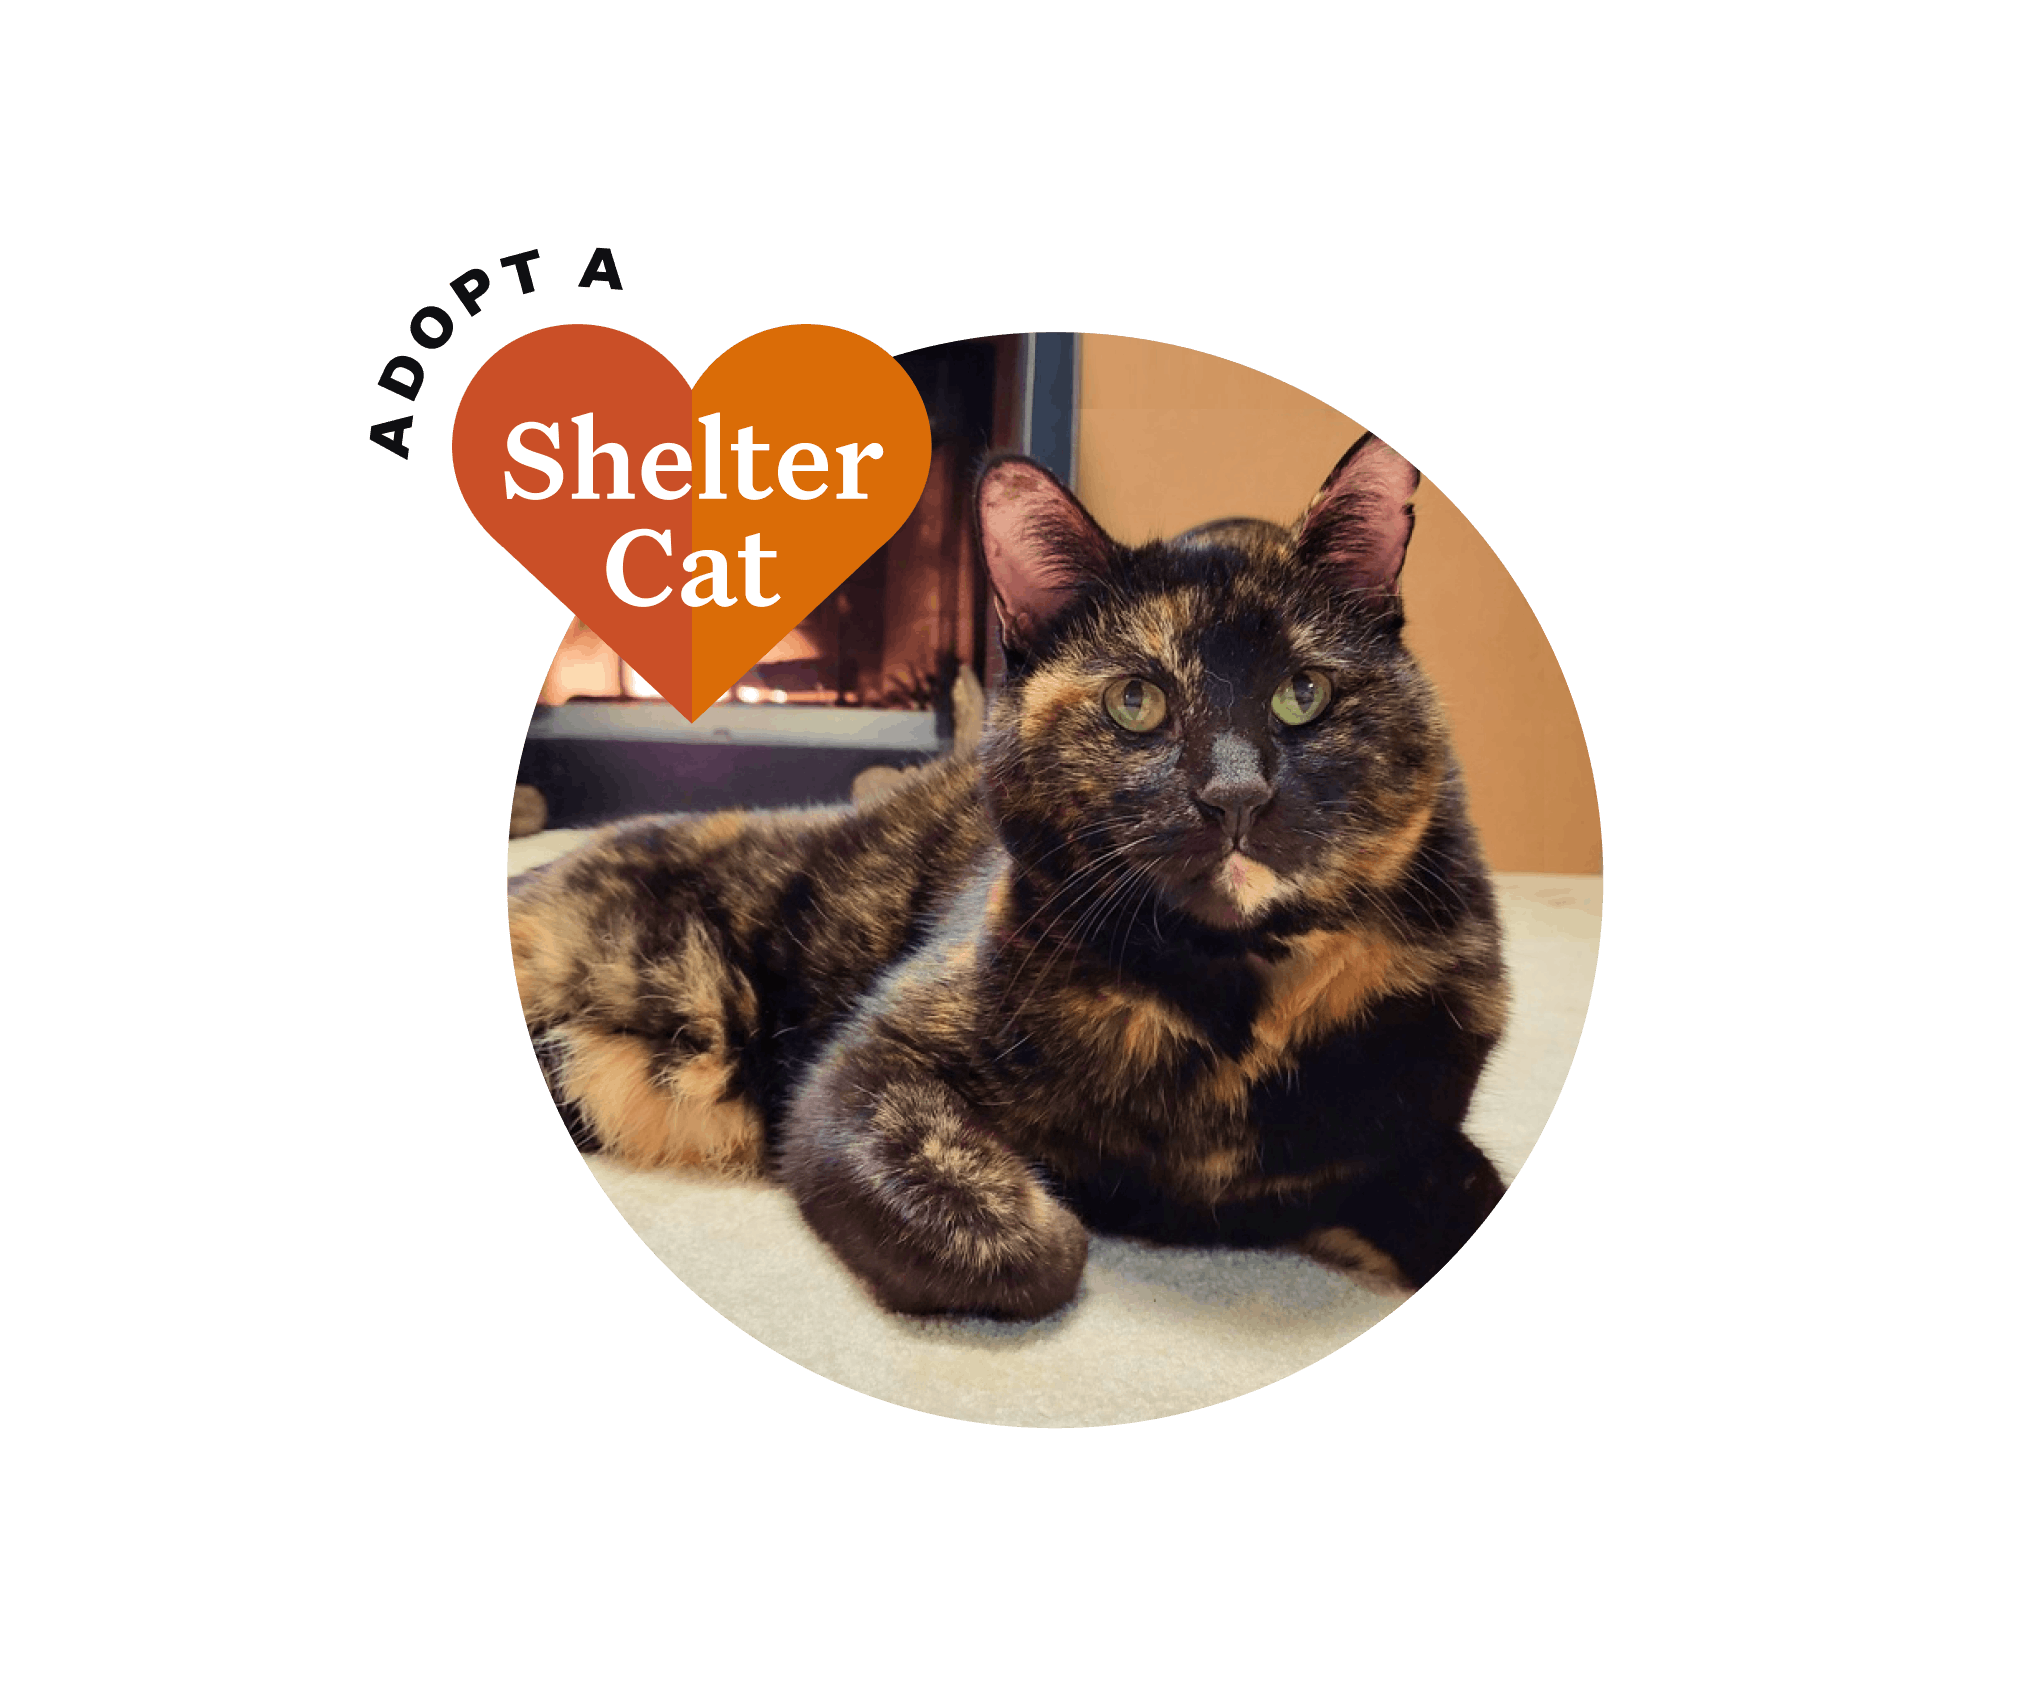 Beautiful Black and orange cat for adopt a shelter cat month